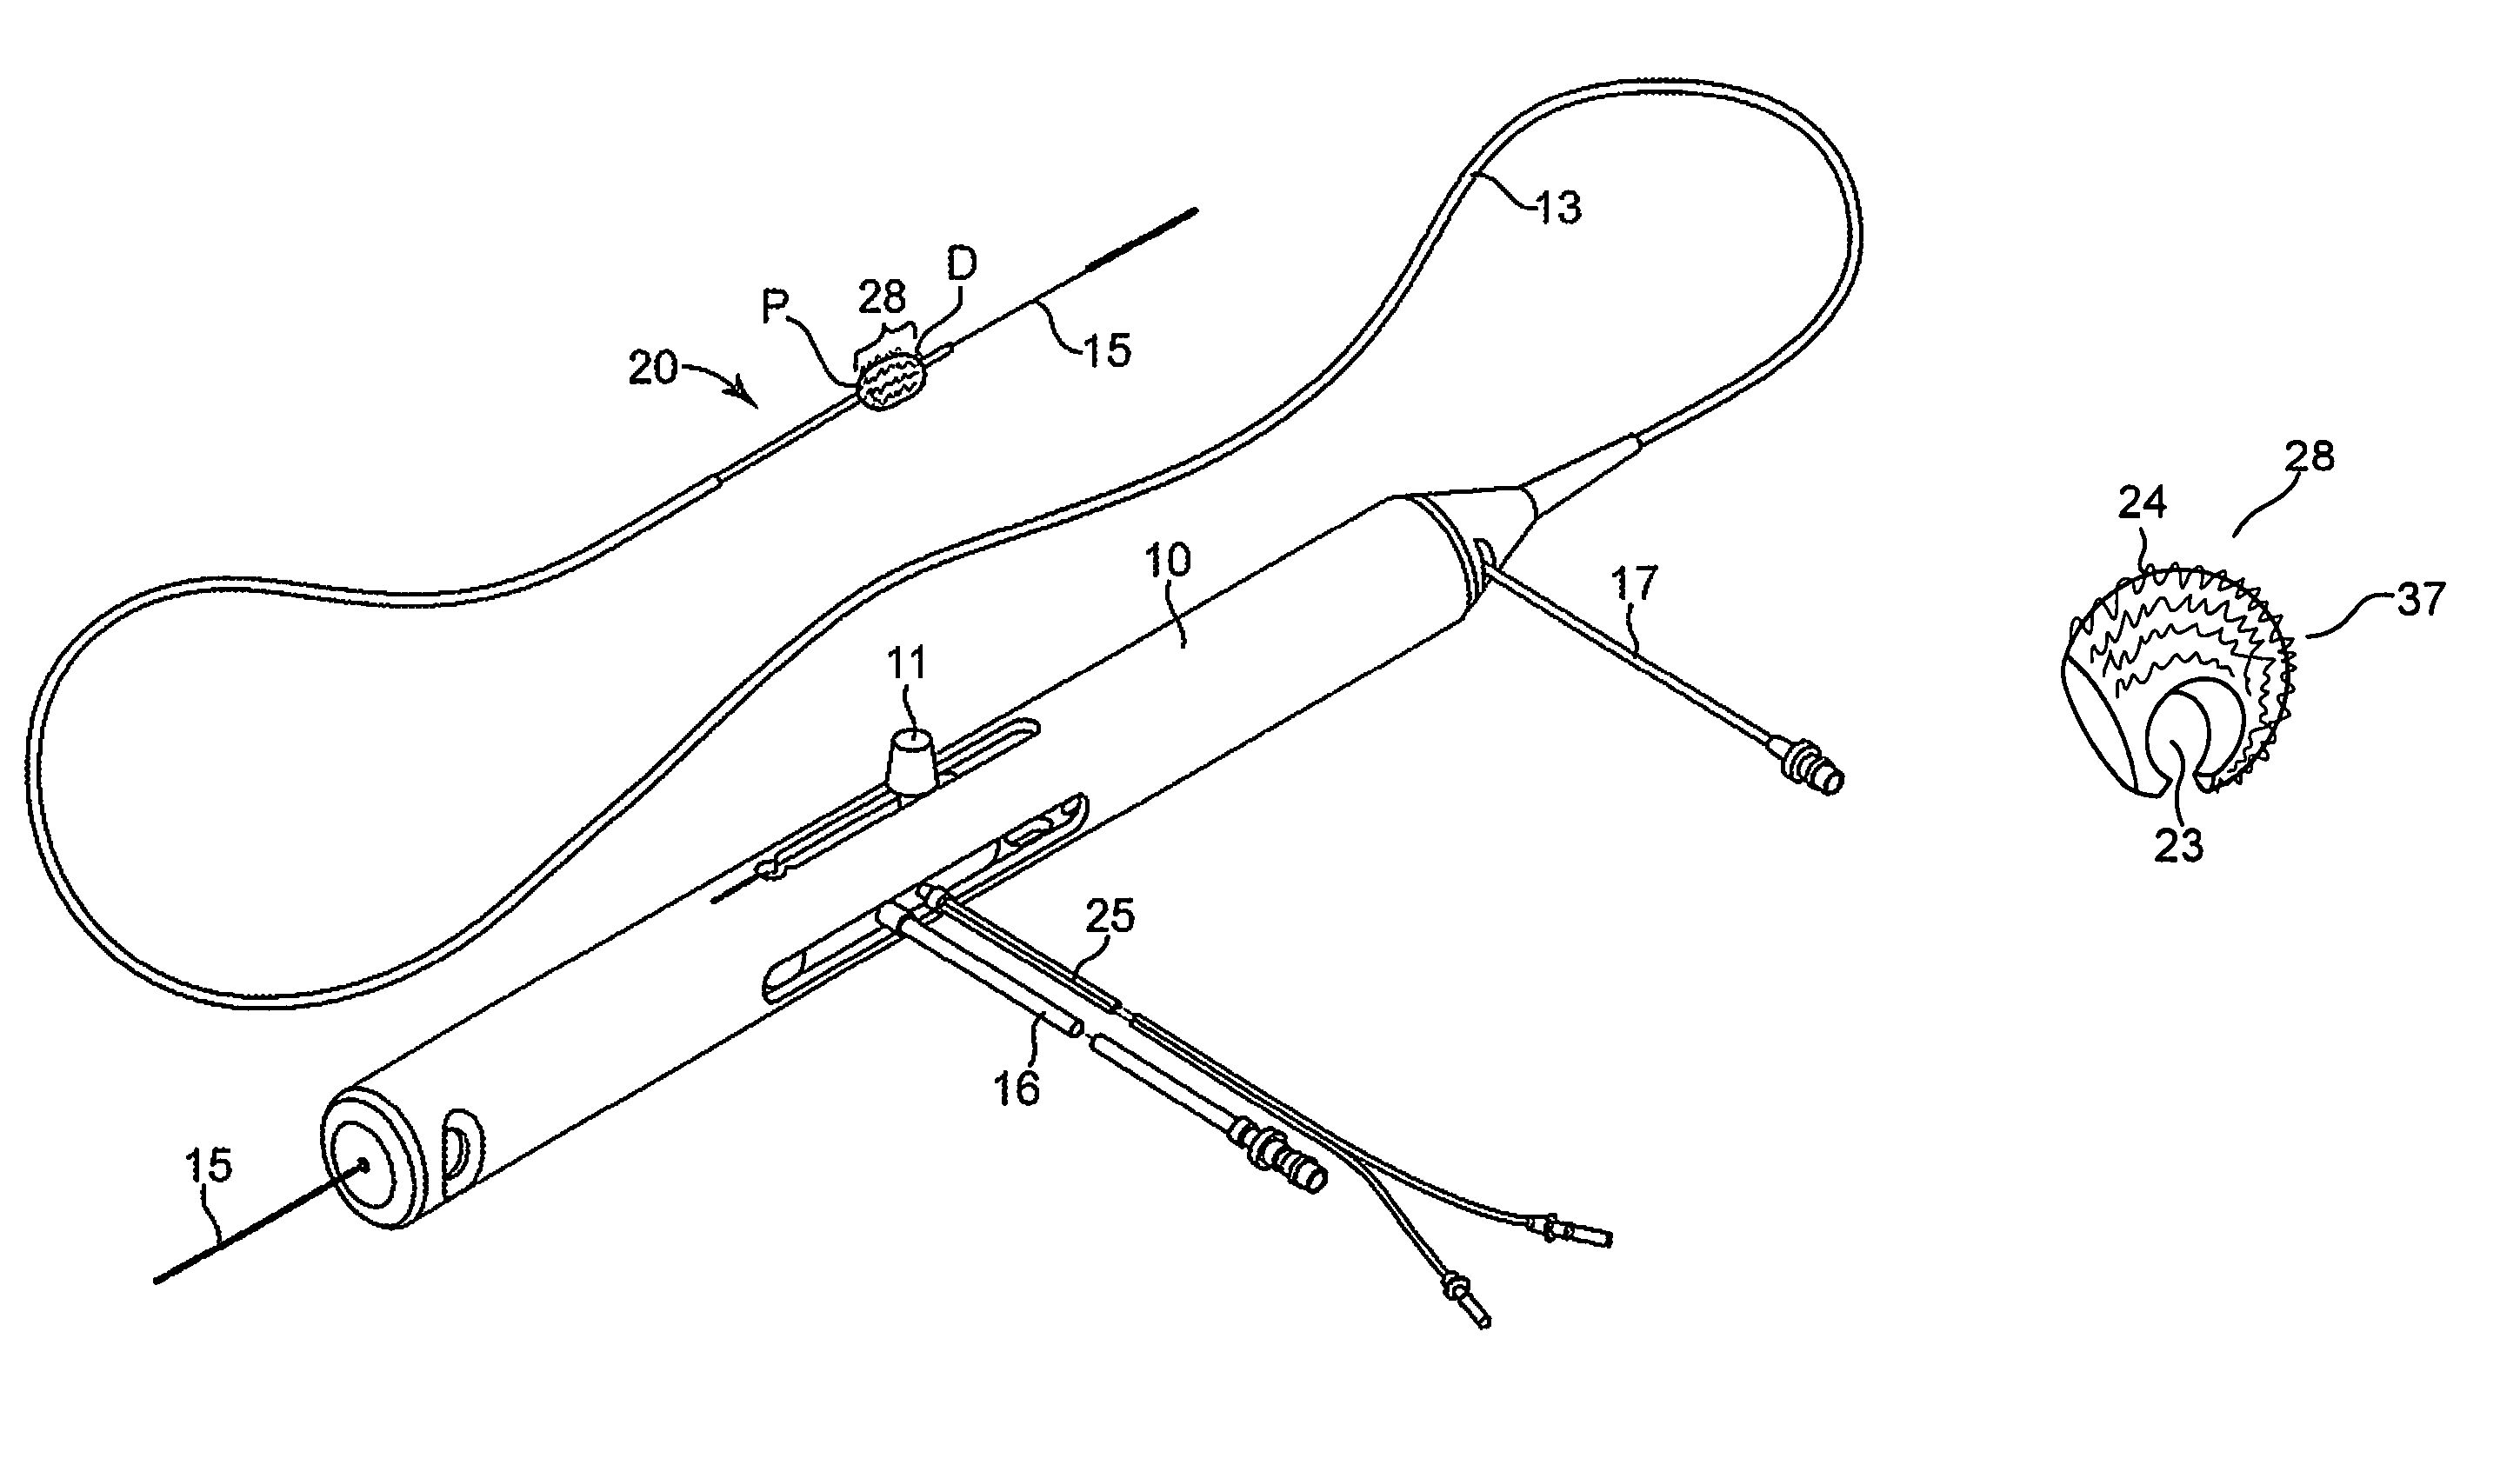 Eccentric abrading element for high-speed rotational atherectomy devices